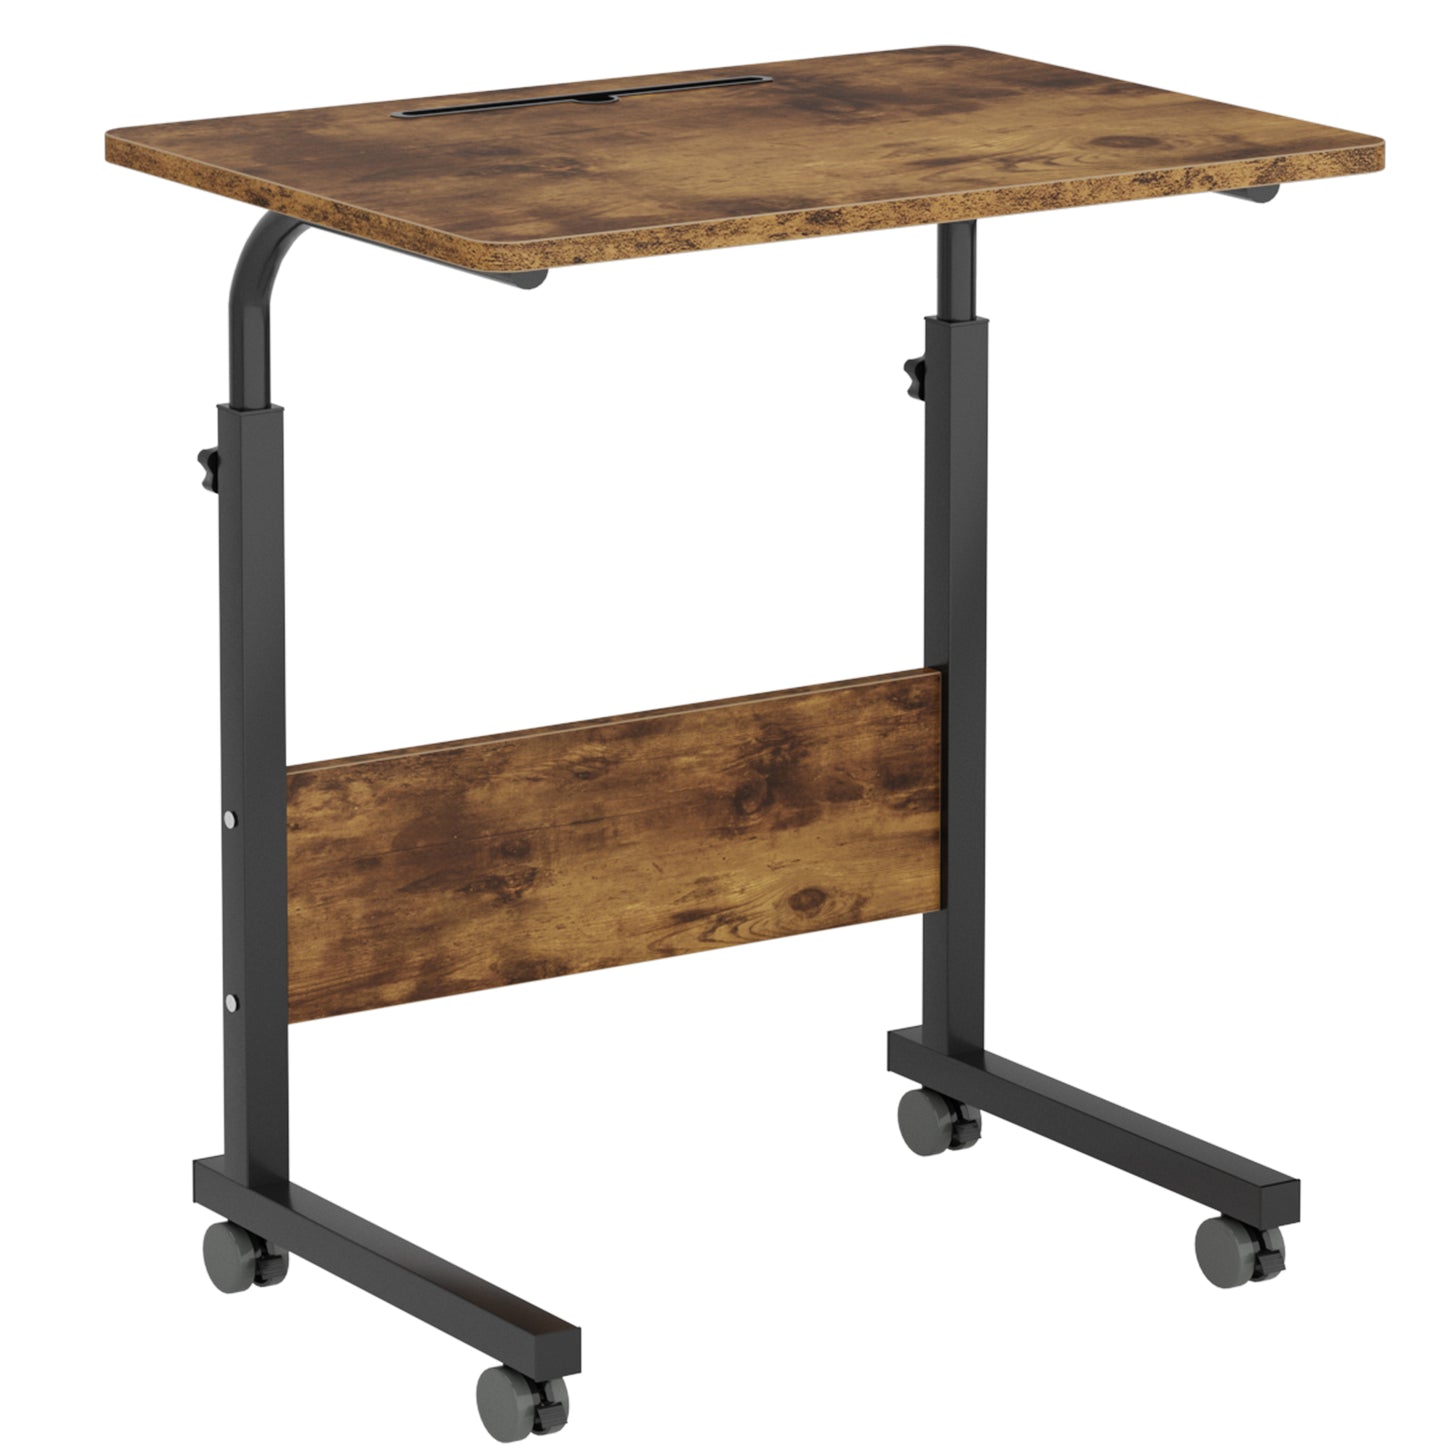 SogesPower Standing Computer Desk with Wheels, Removable Side Desk with Adjustable Height- Walnut